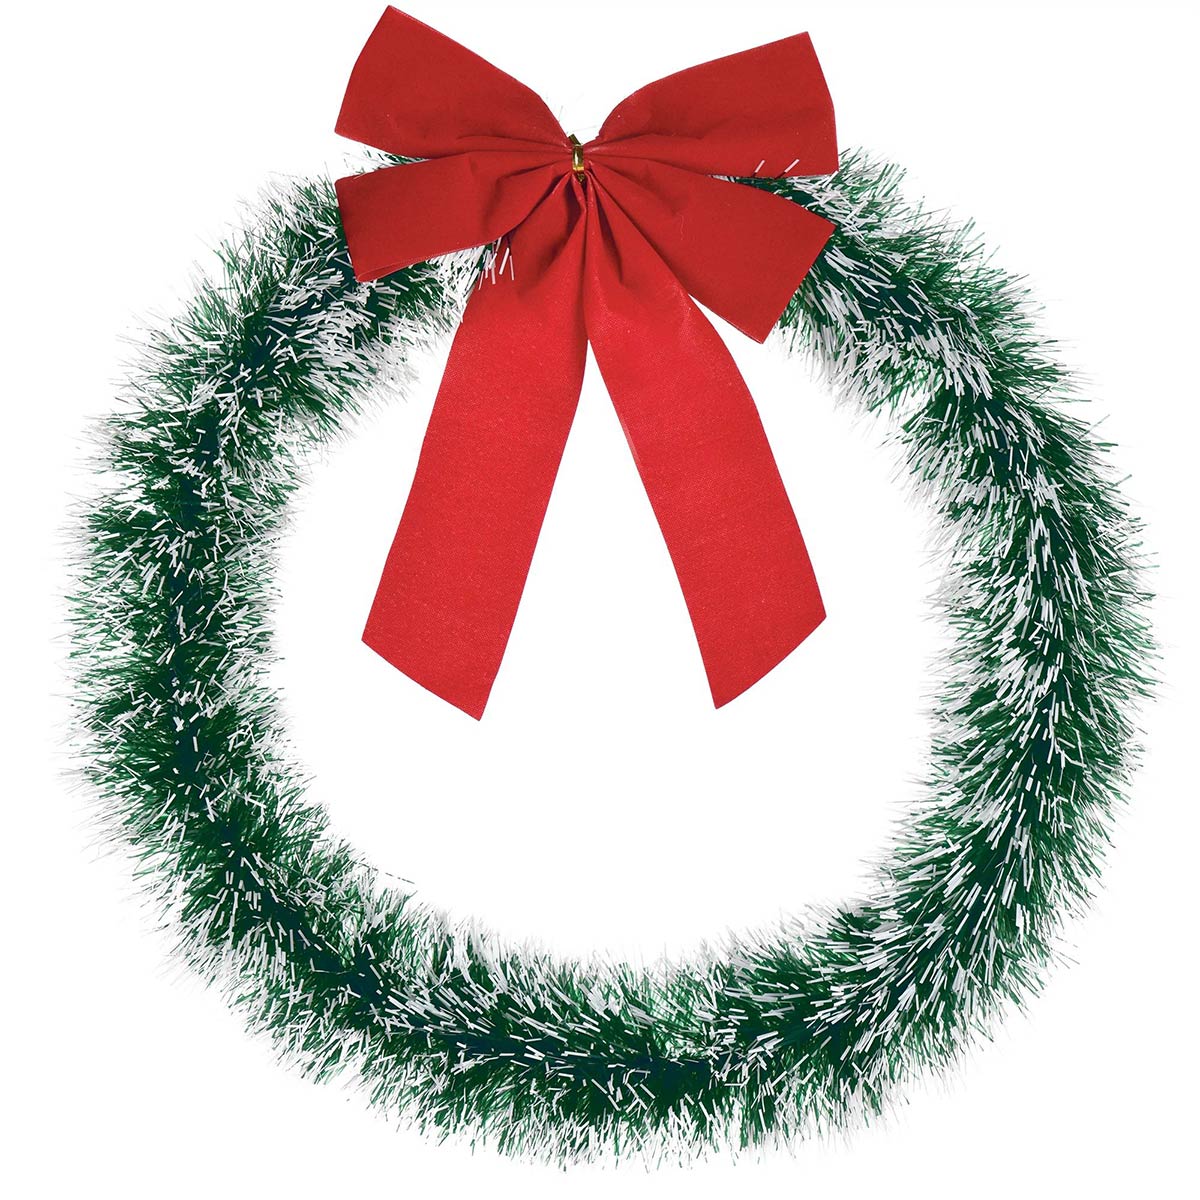 AMSCAN CA Christmas Artificial Pine Christmas Wreath, 16 Inches, 1 Count